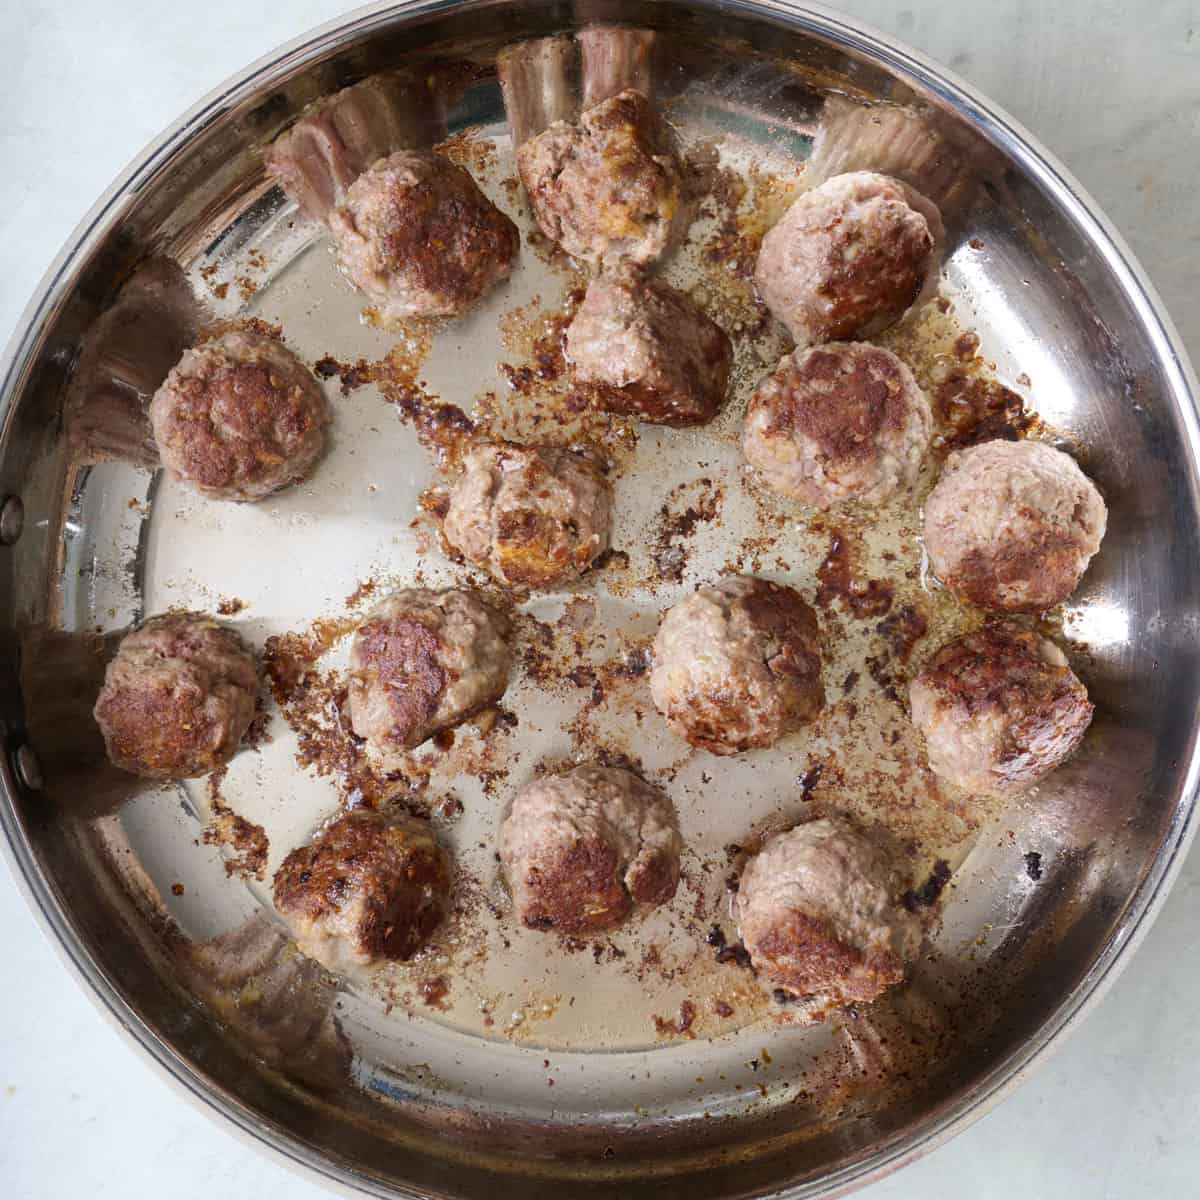 Meatballs in a skillet after browning.